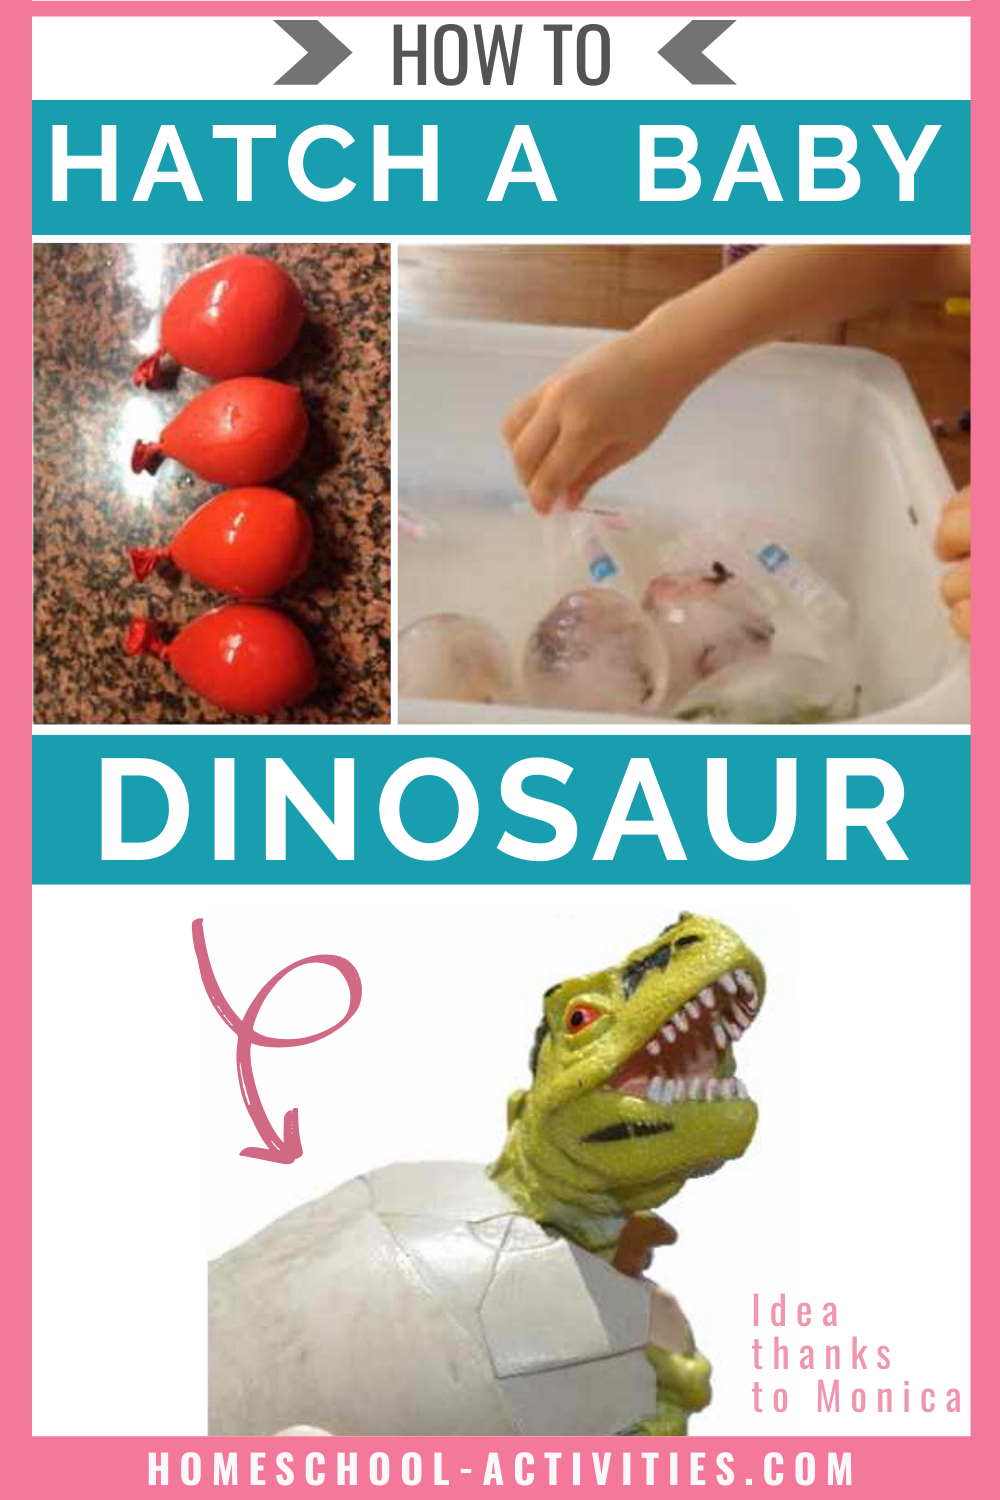 How to hatch a baby dinosaur